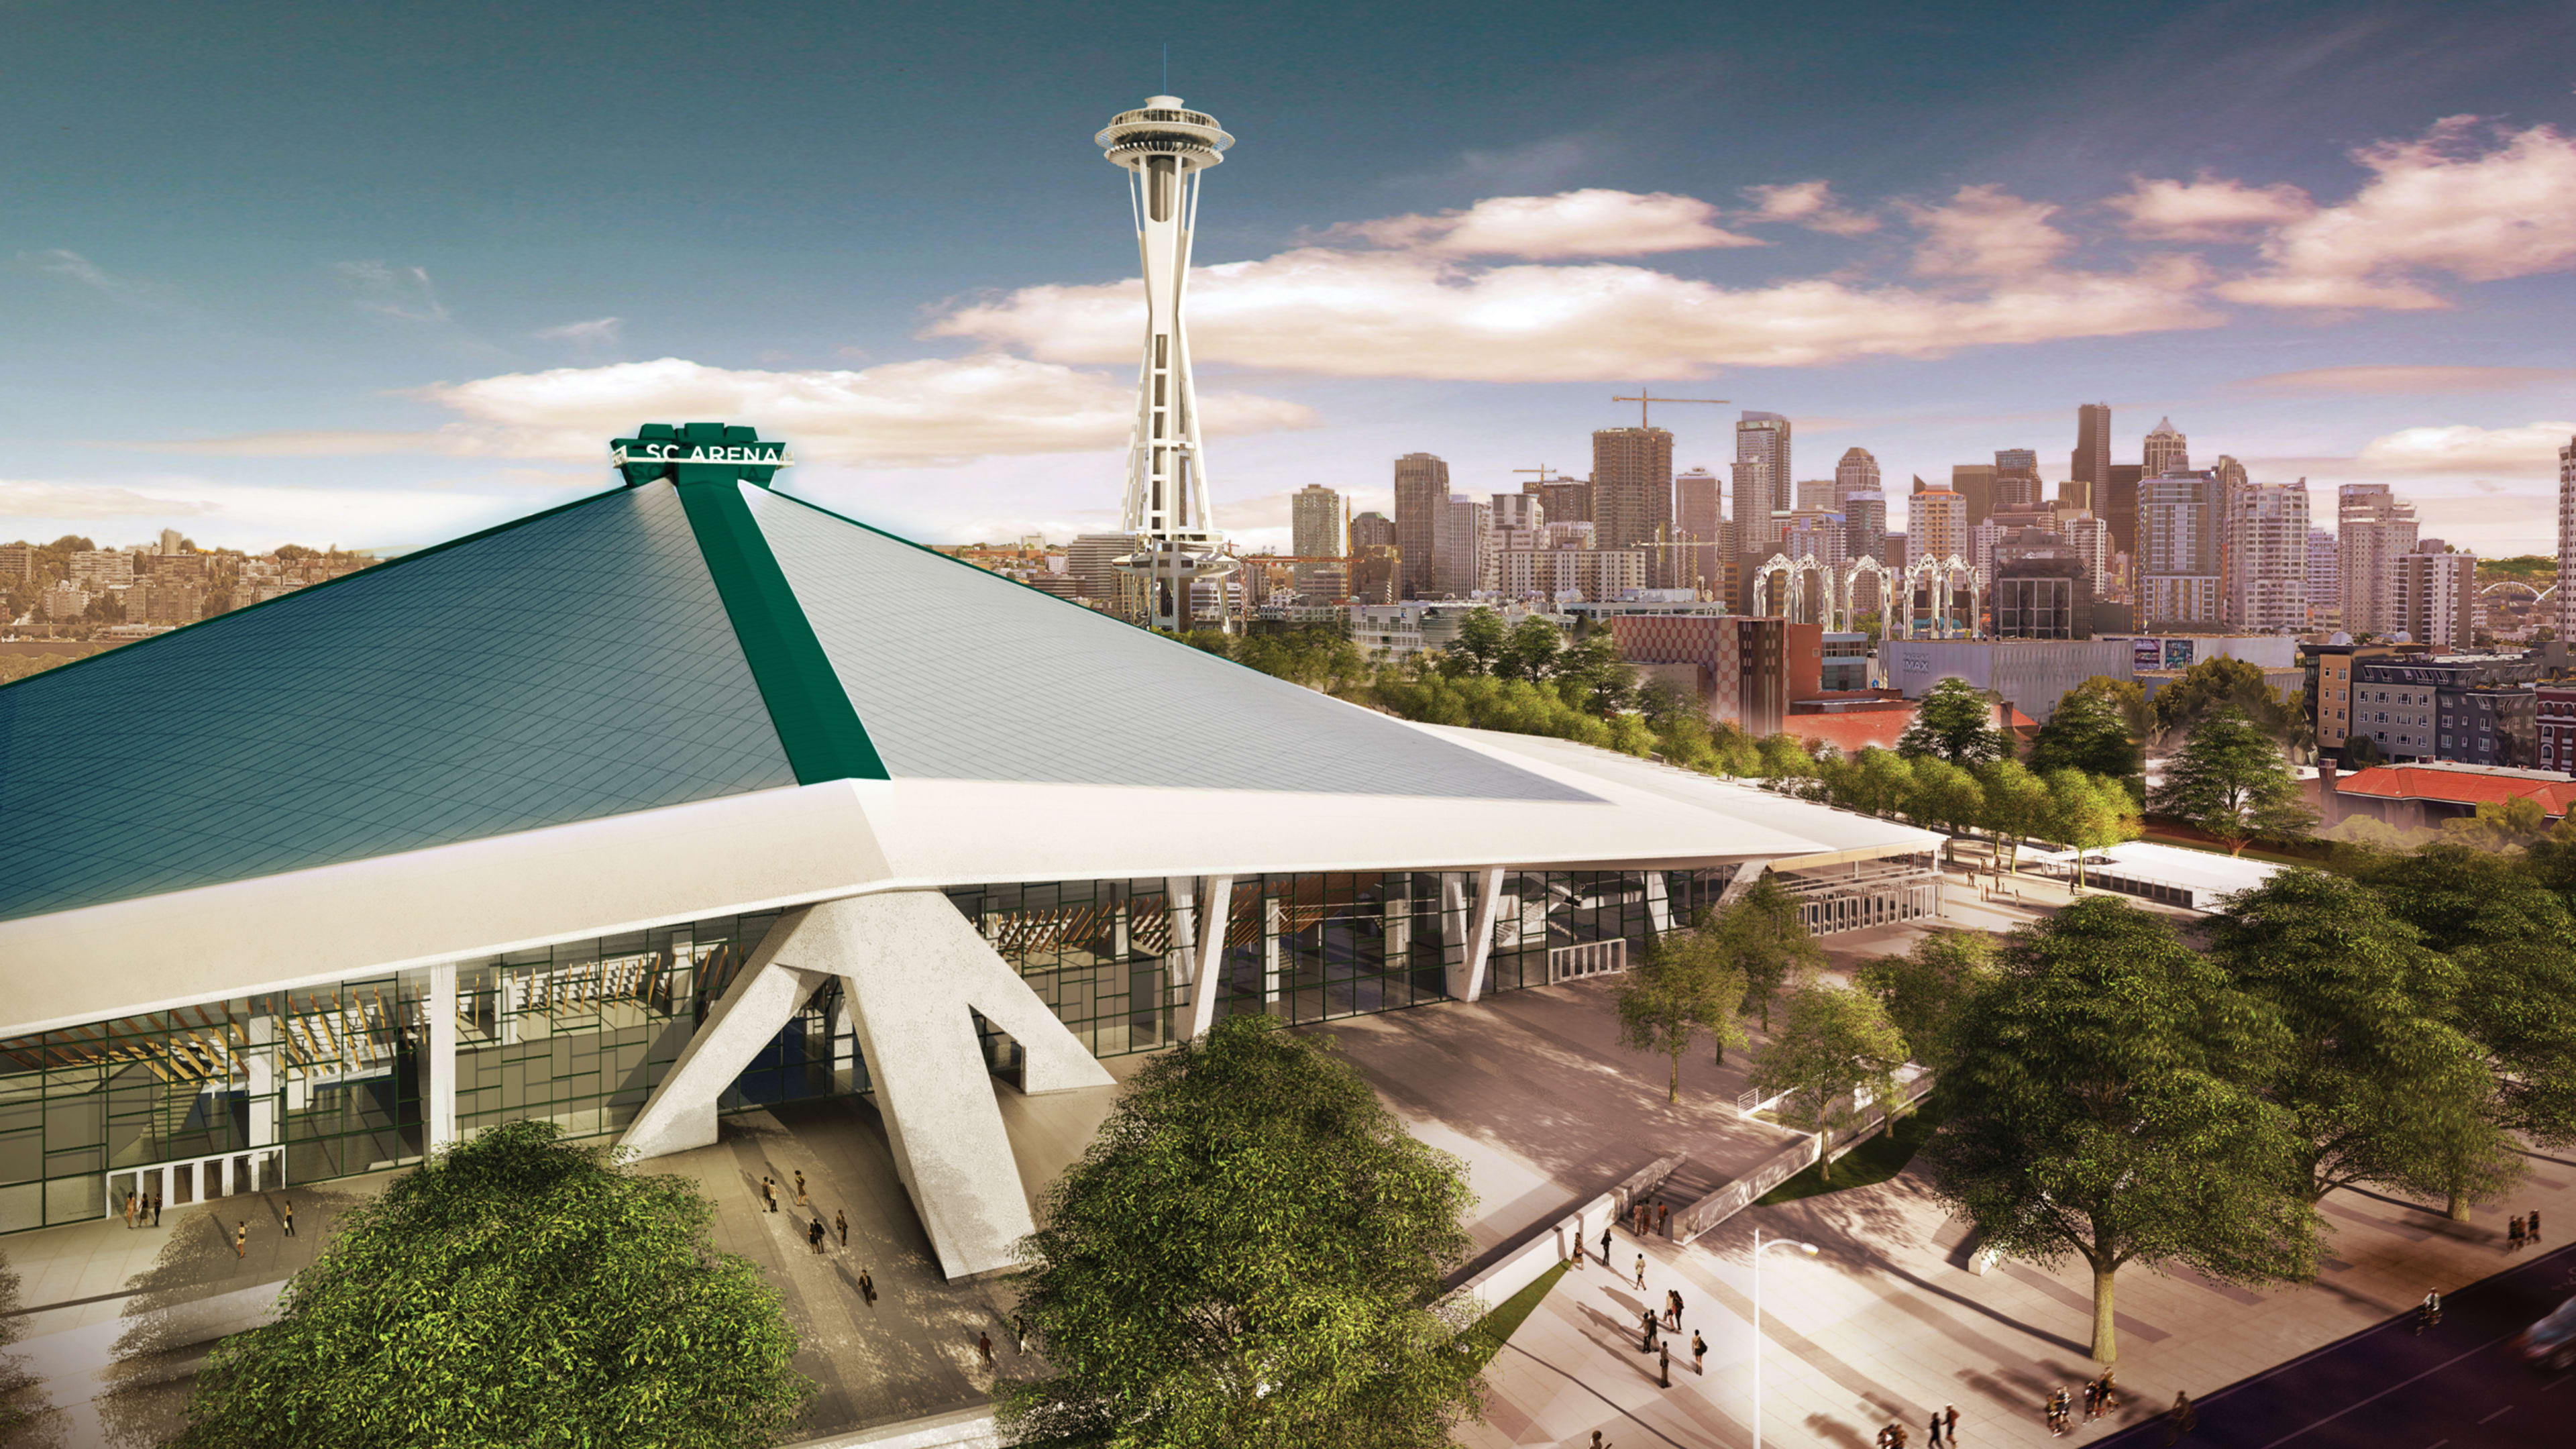 Seattle’s new NHL team will give fans free public transit to get to games